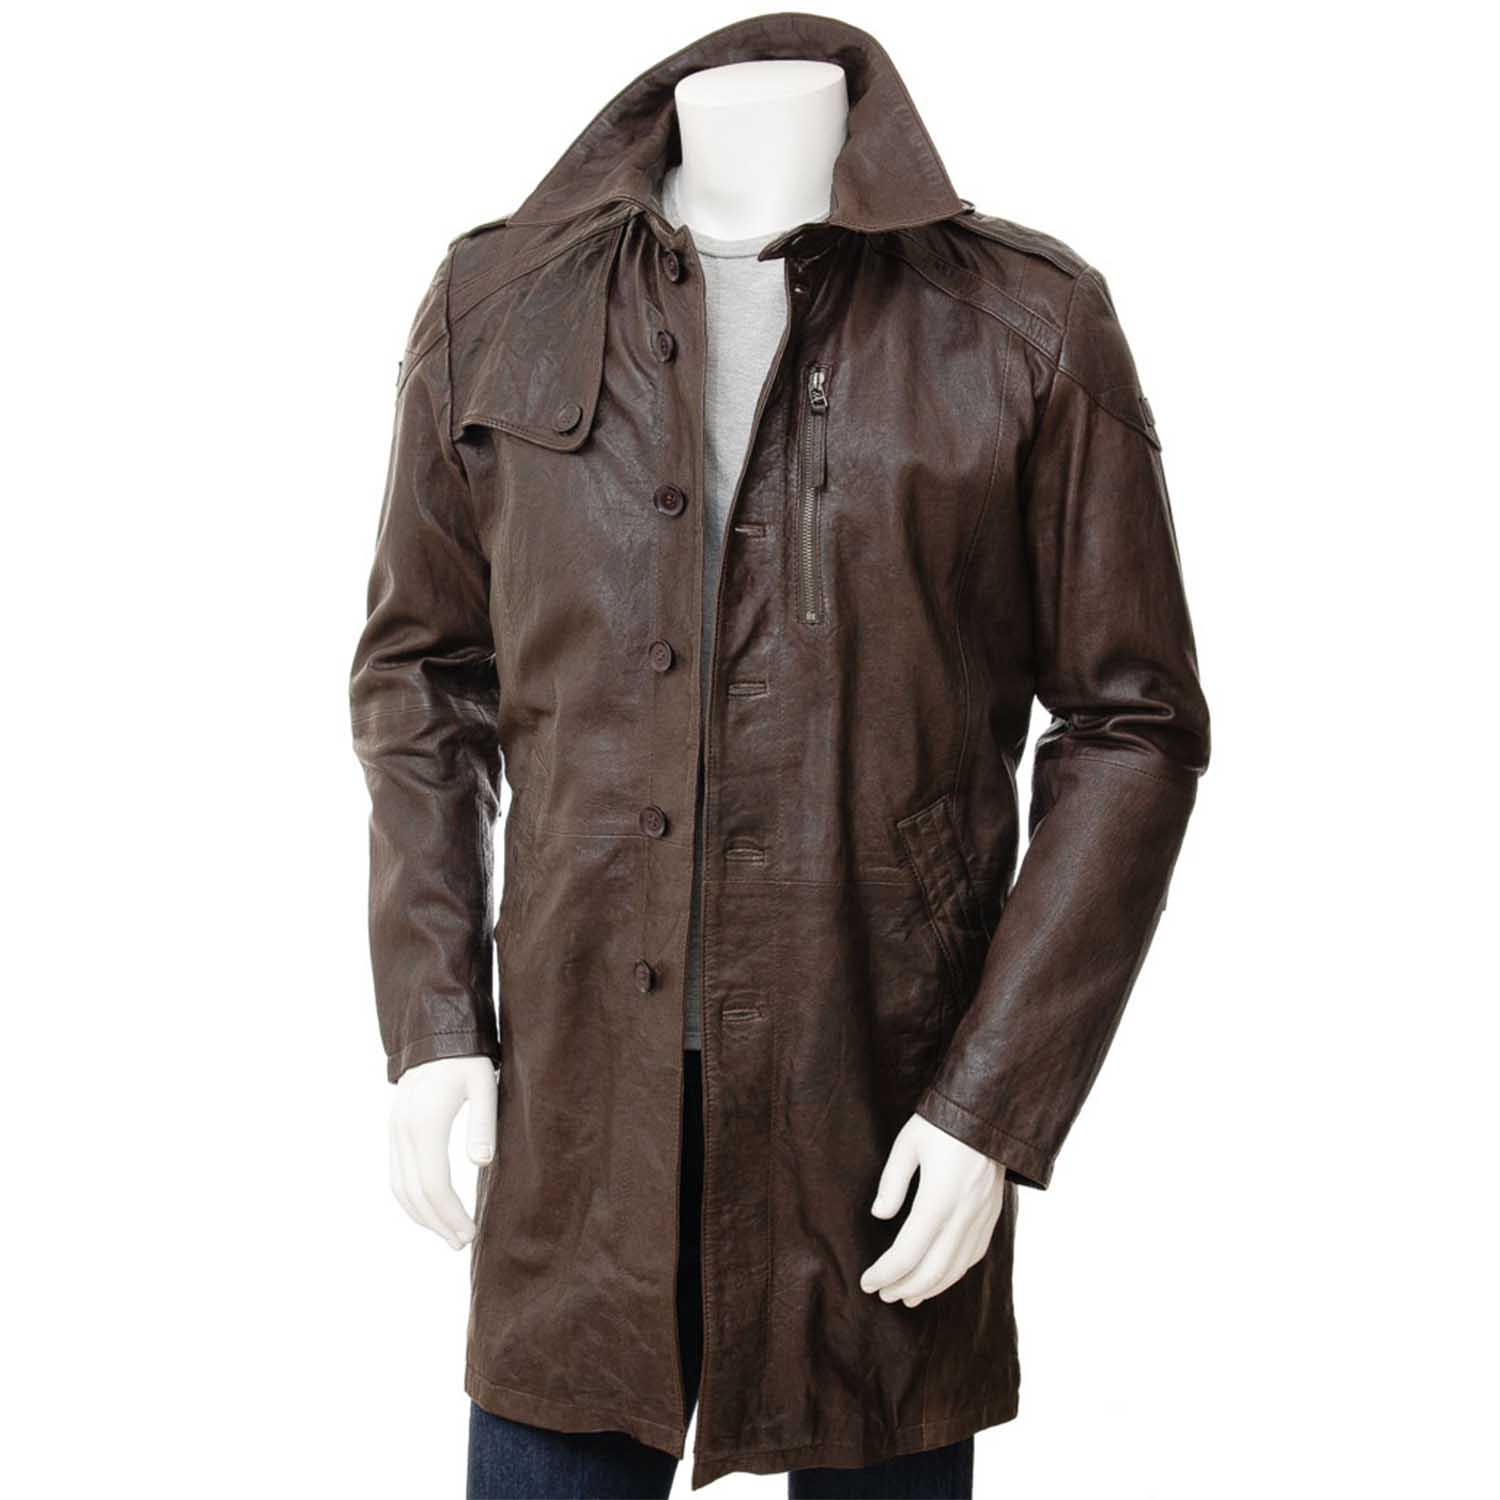 Men's Brown Leather Trench Coat - Blazon Leather